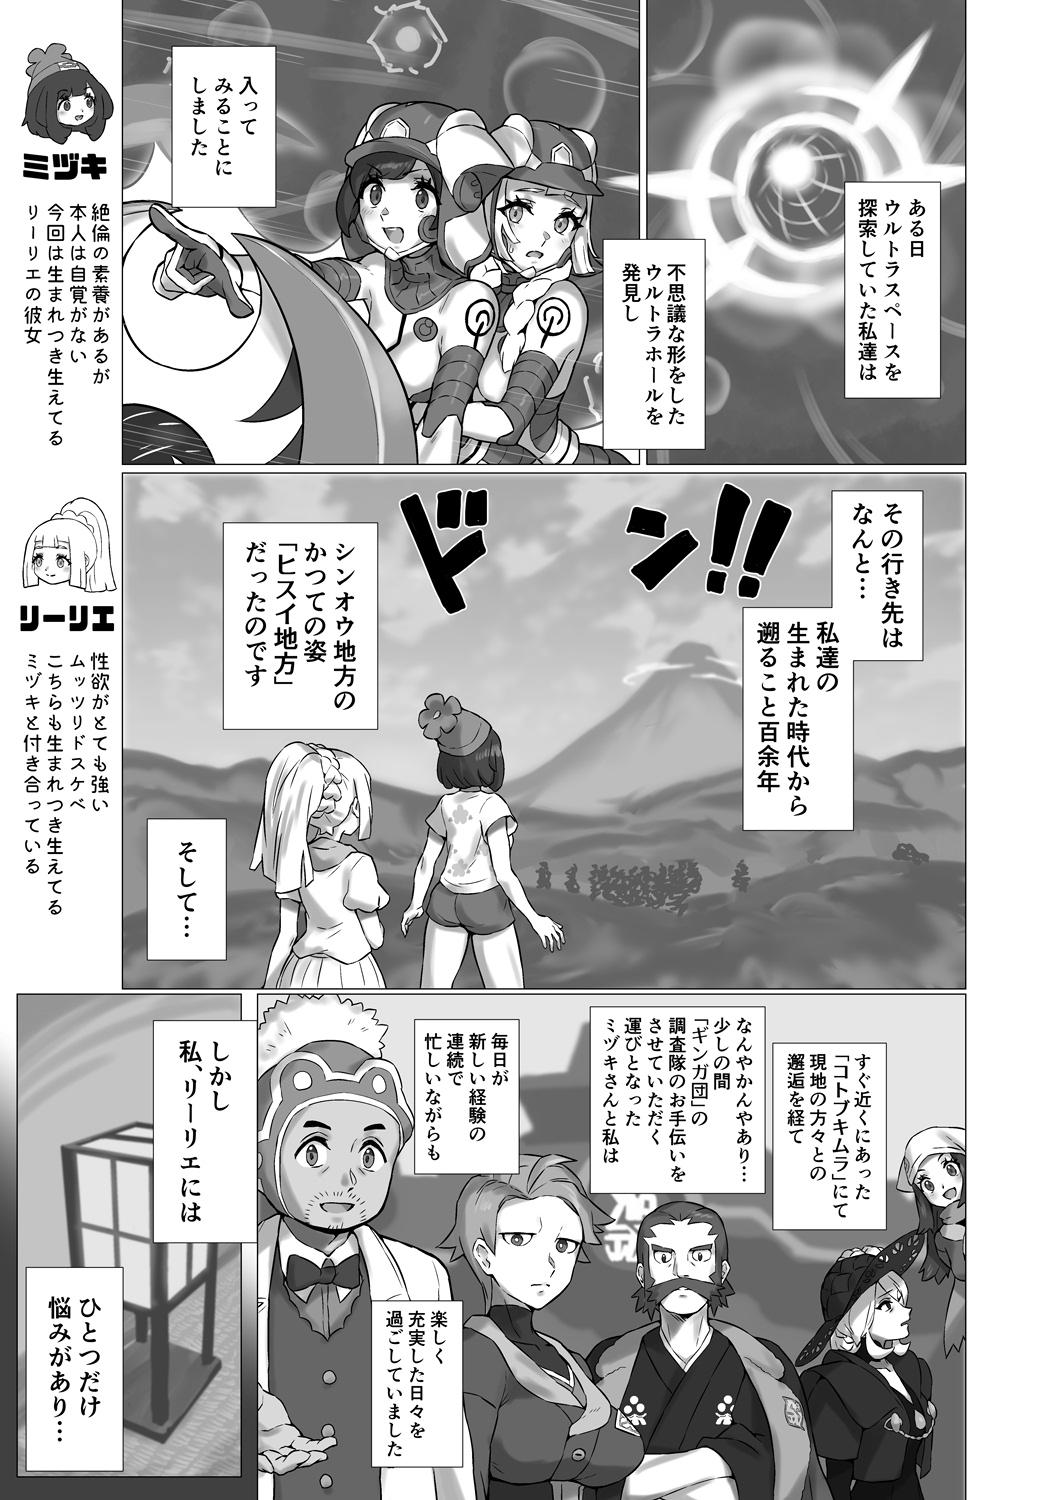 Dominate ShinyMoon x WhiteLily 4 - Pokemon | pocket monsters Adult - Page 2